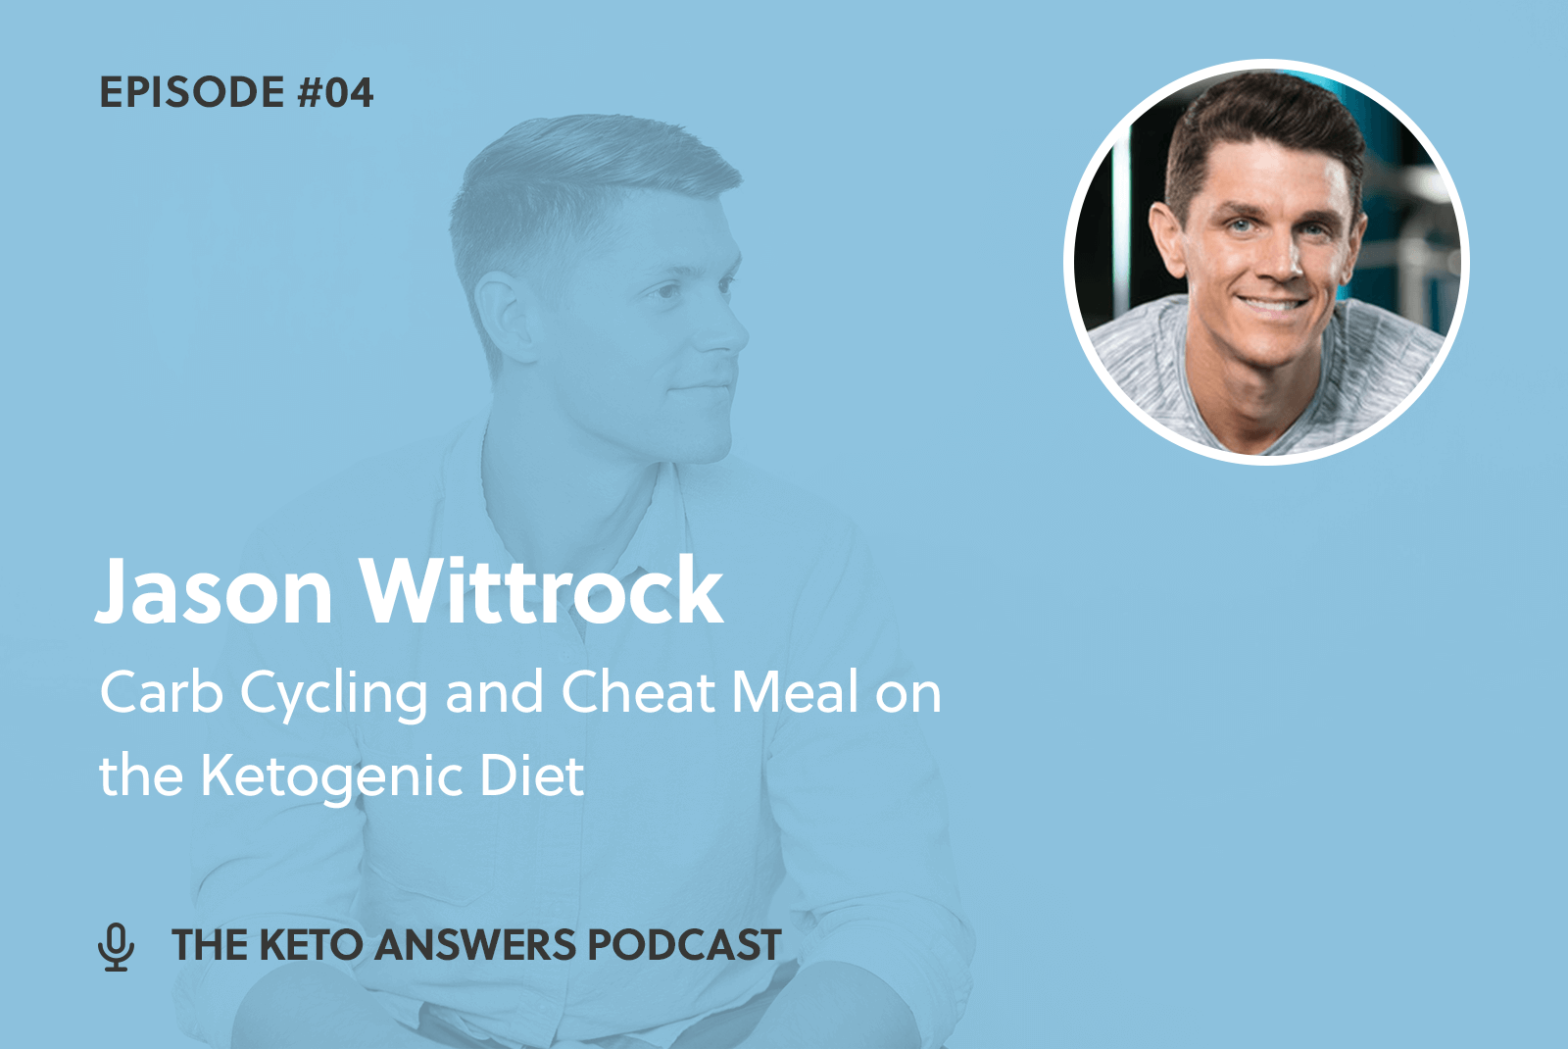 004: Carb Cycling and Cheat Meals on the Ketogenic Diet - Jason Wittrock